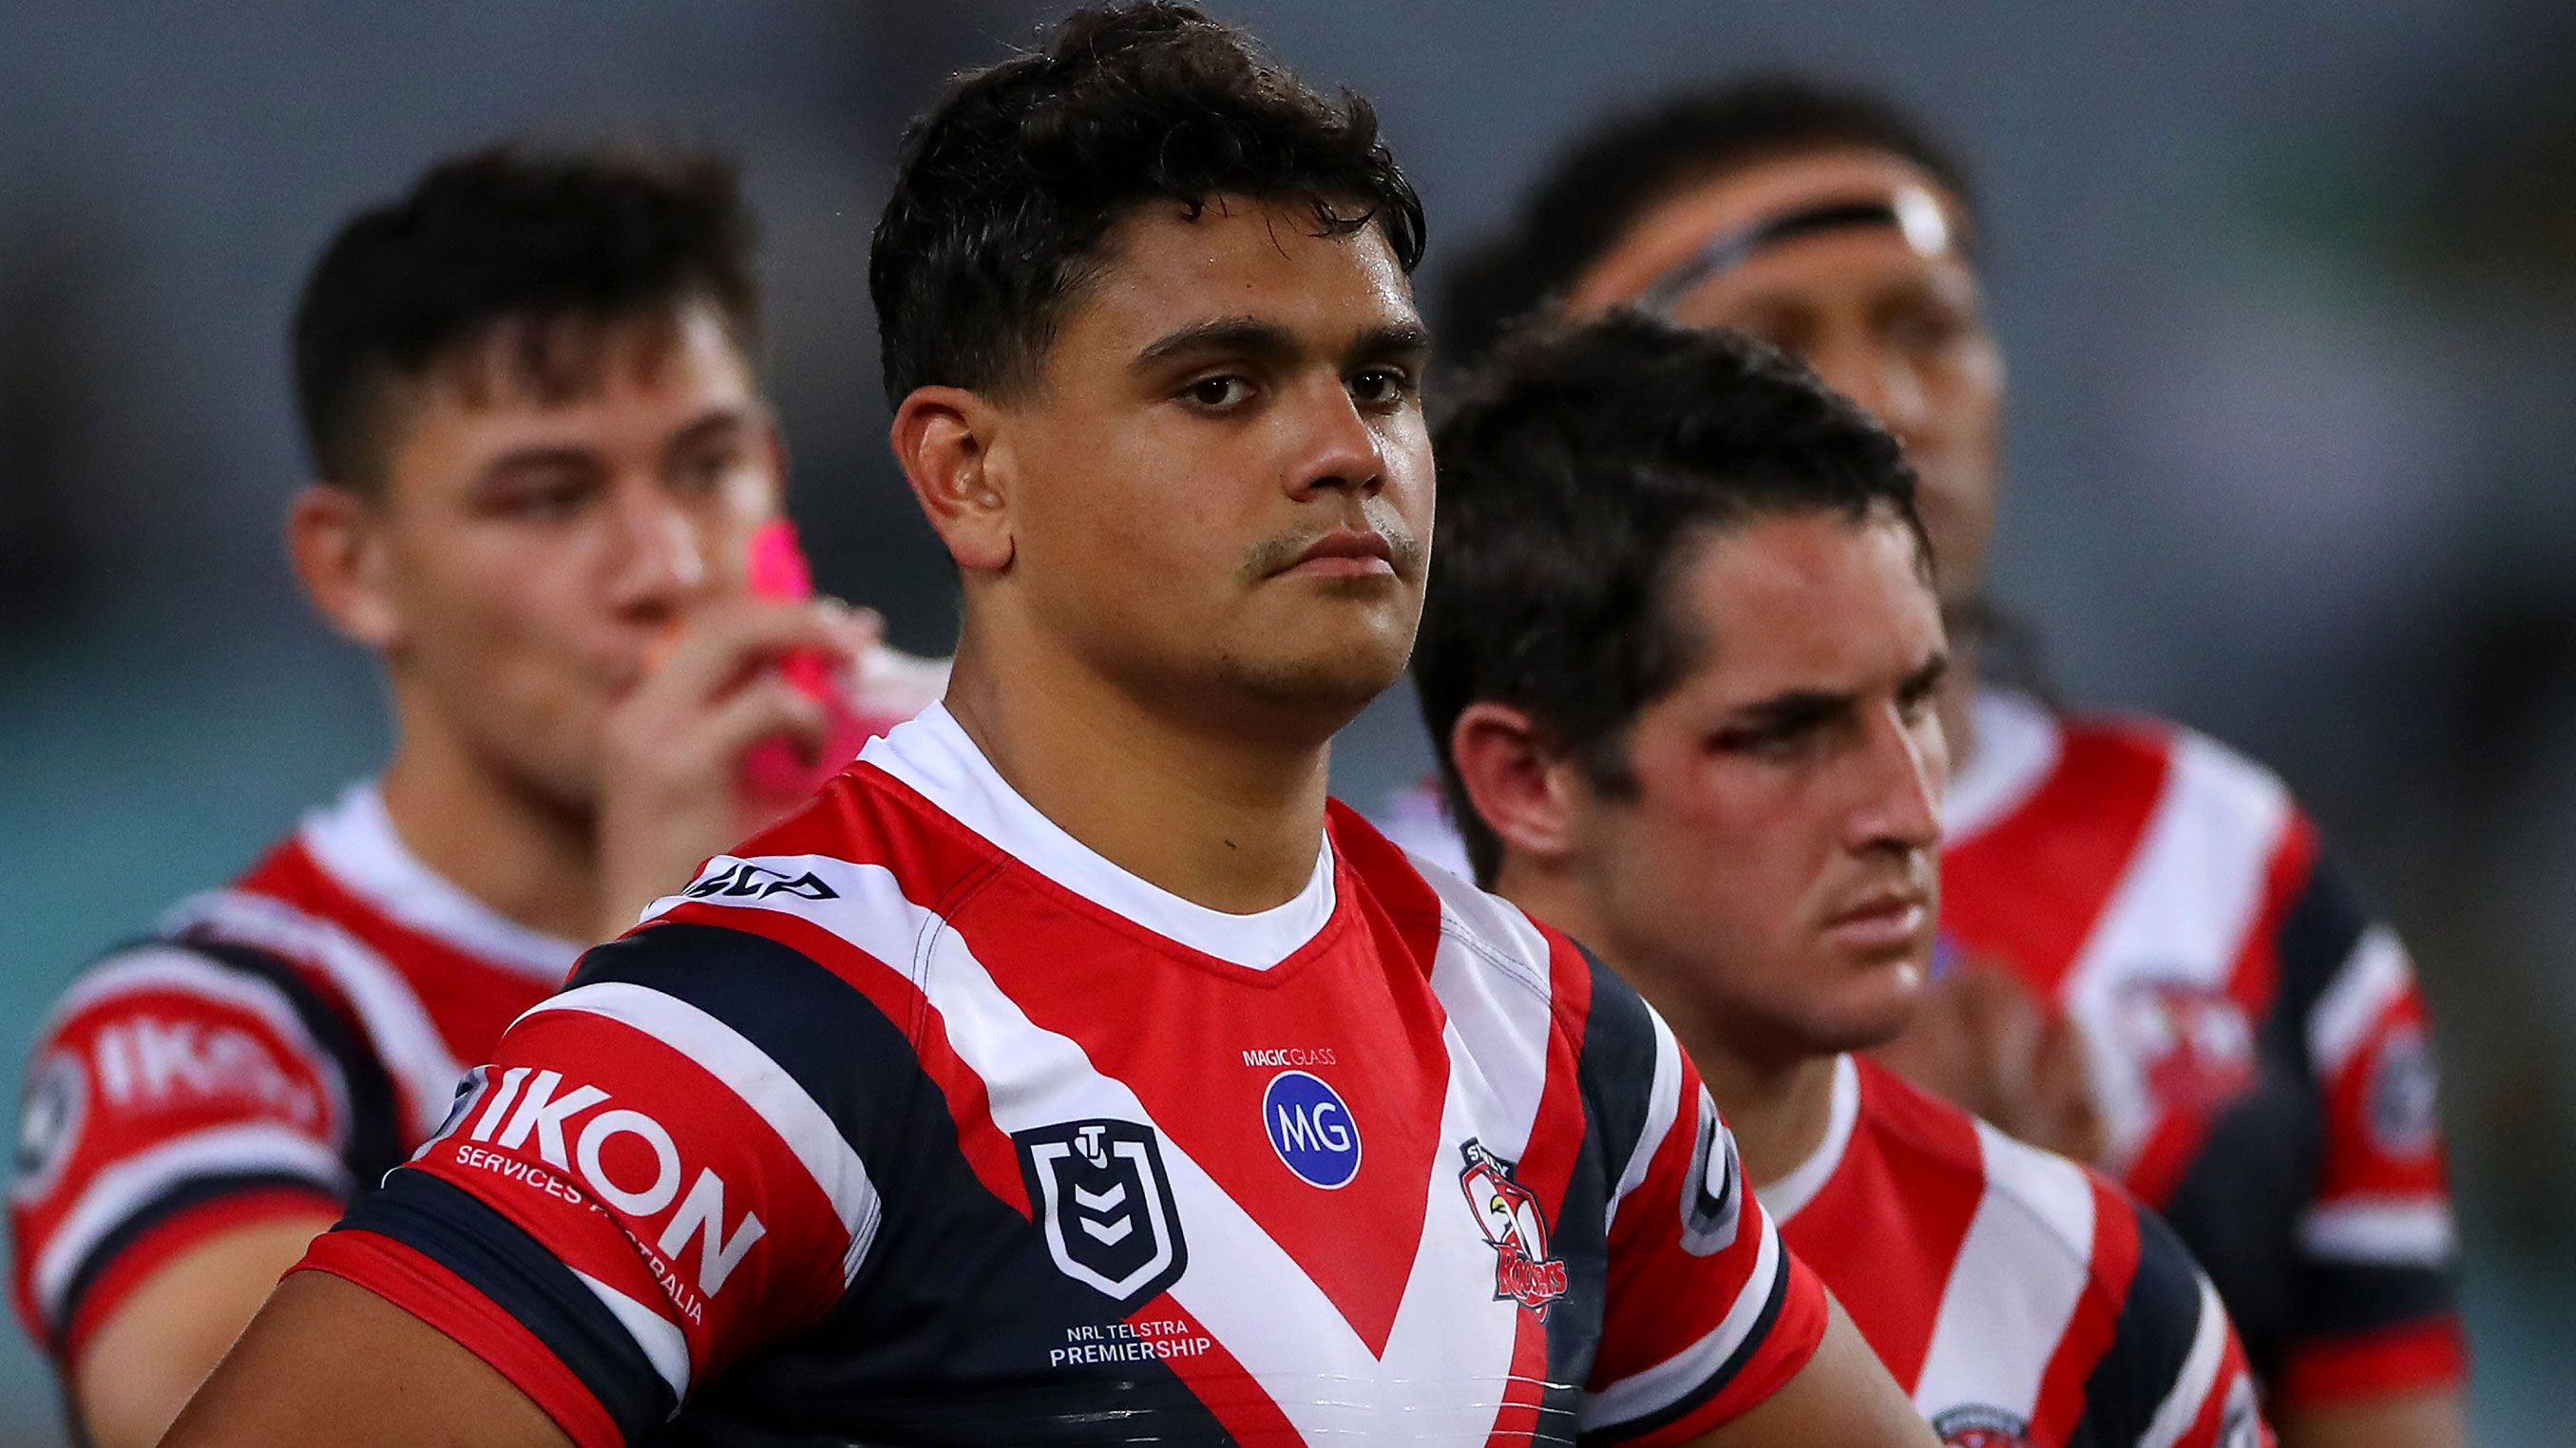 Latrell Mitchell Rabbitohs rumour resurfaces before Roosters grudge match